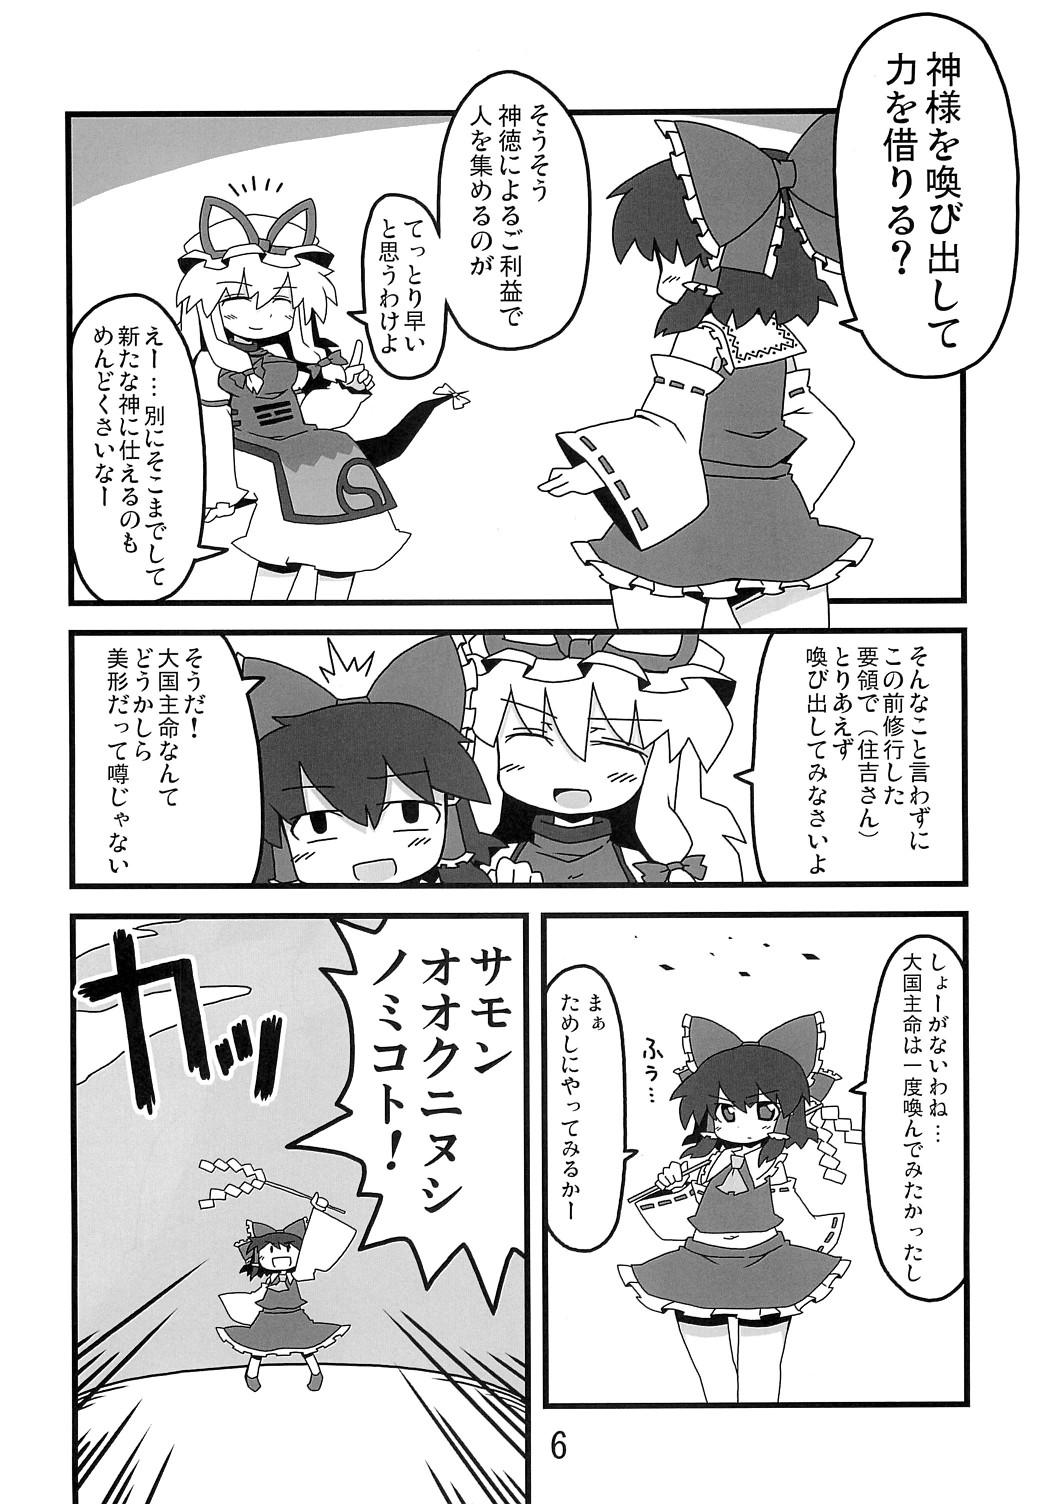 Teenager 東方豊年祭 - Touhou project Tamil - Page 5